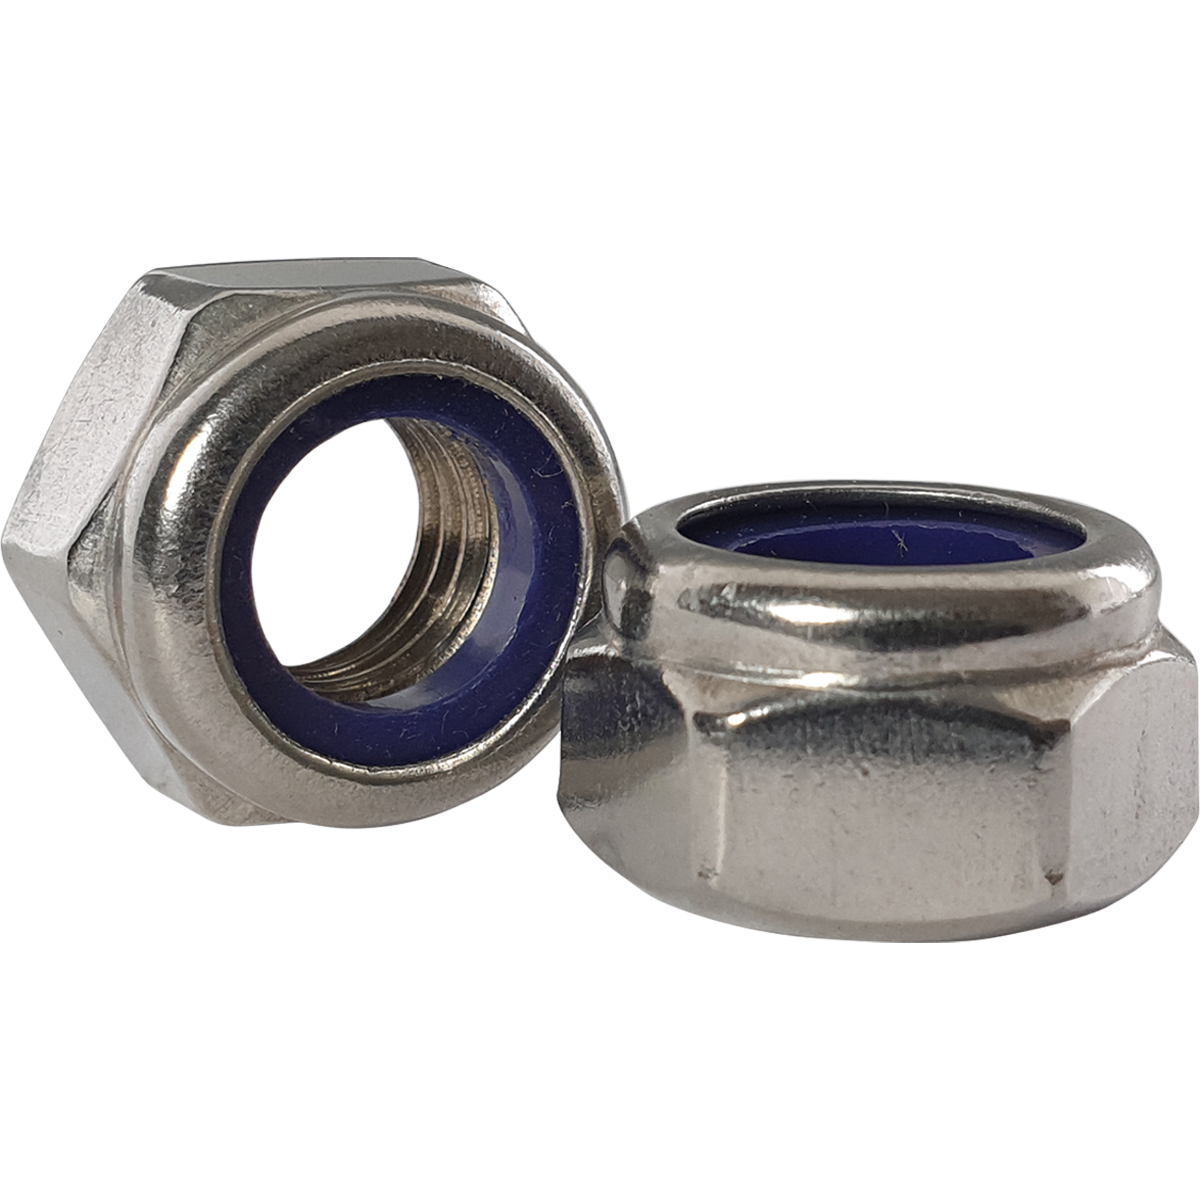 A2 stainless steel nylon insert nuts, also known as nyloc nuts, or nylon insert lock nuts. A hexagon nut with a nylon insert to aid in tightening and stop the ingress of liquids. 